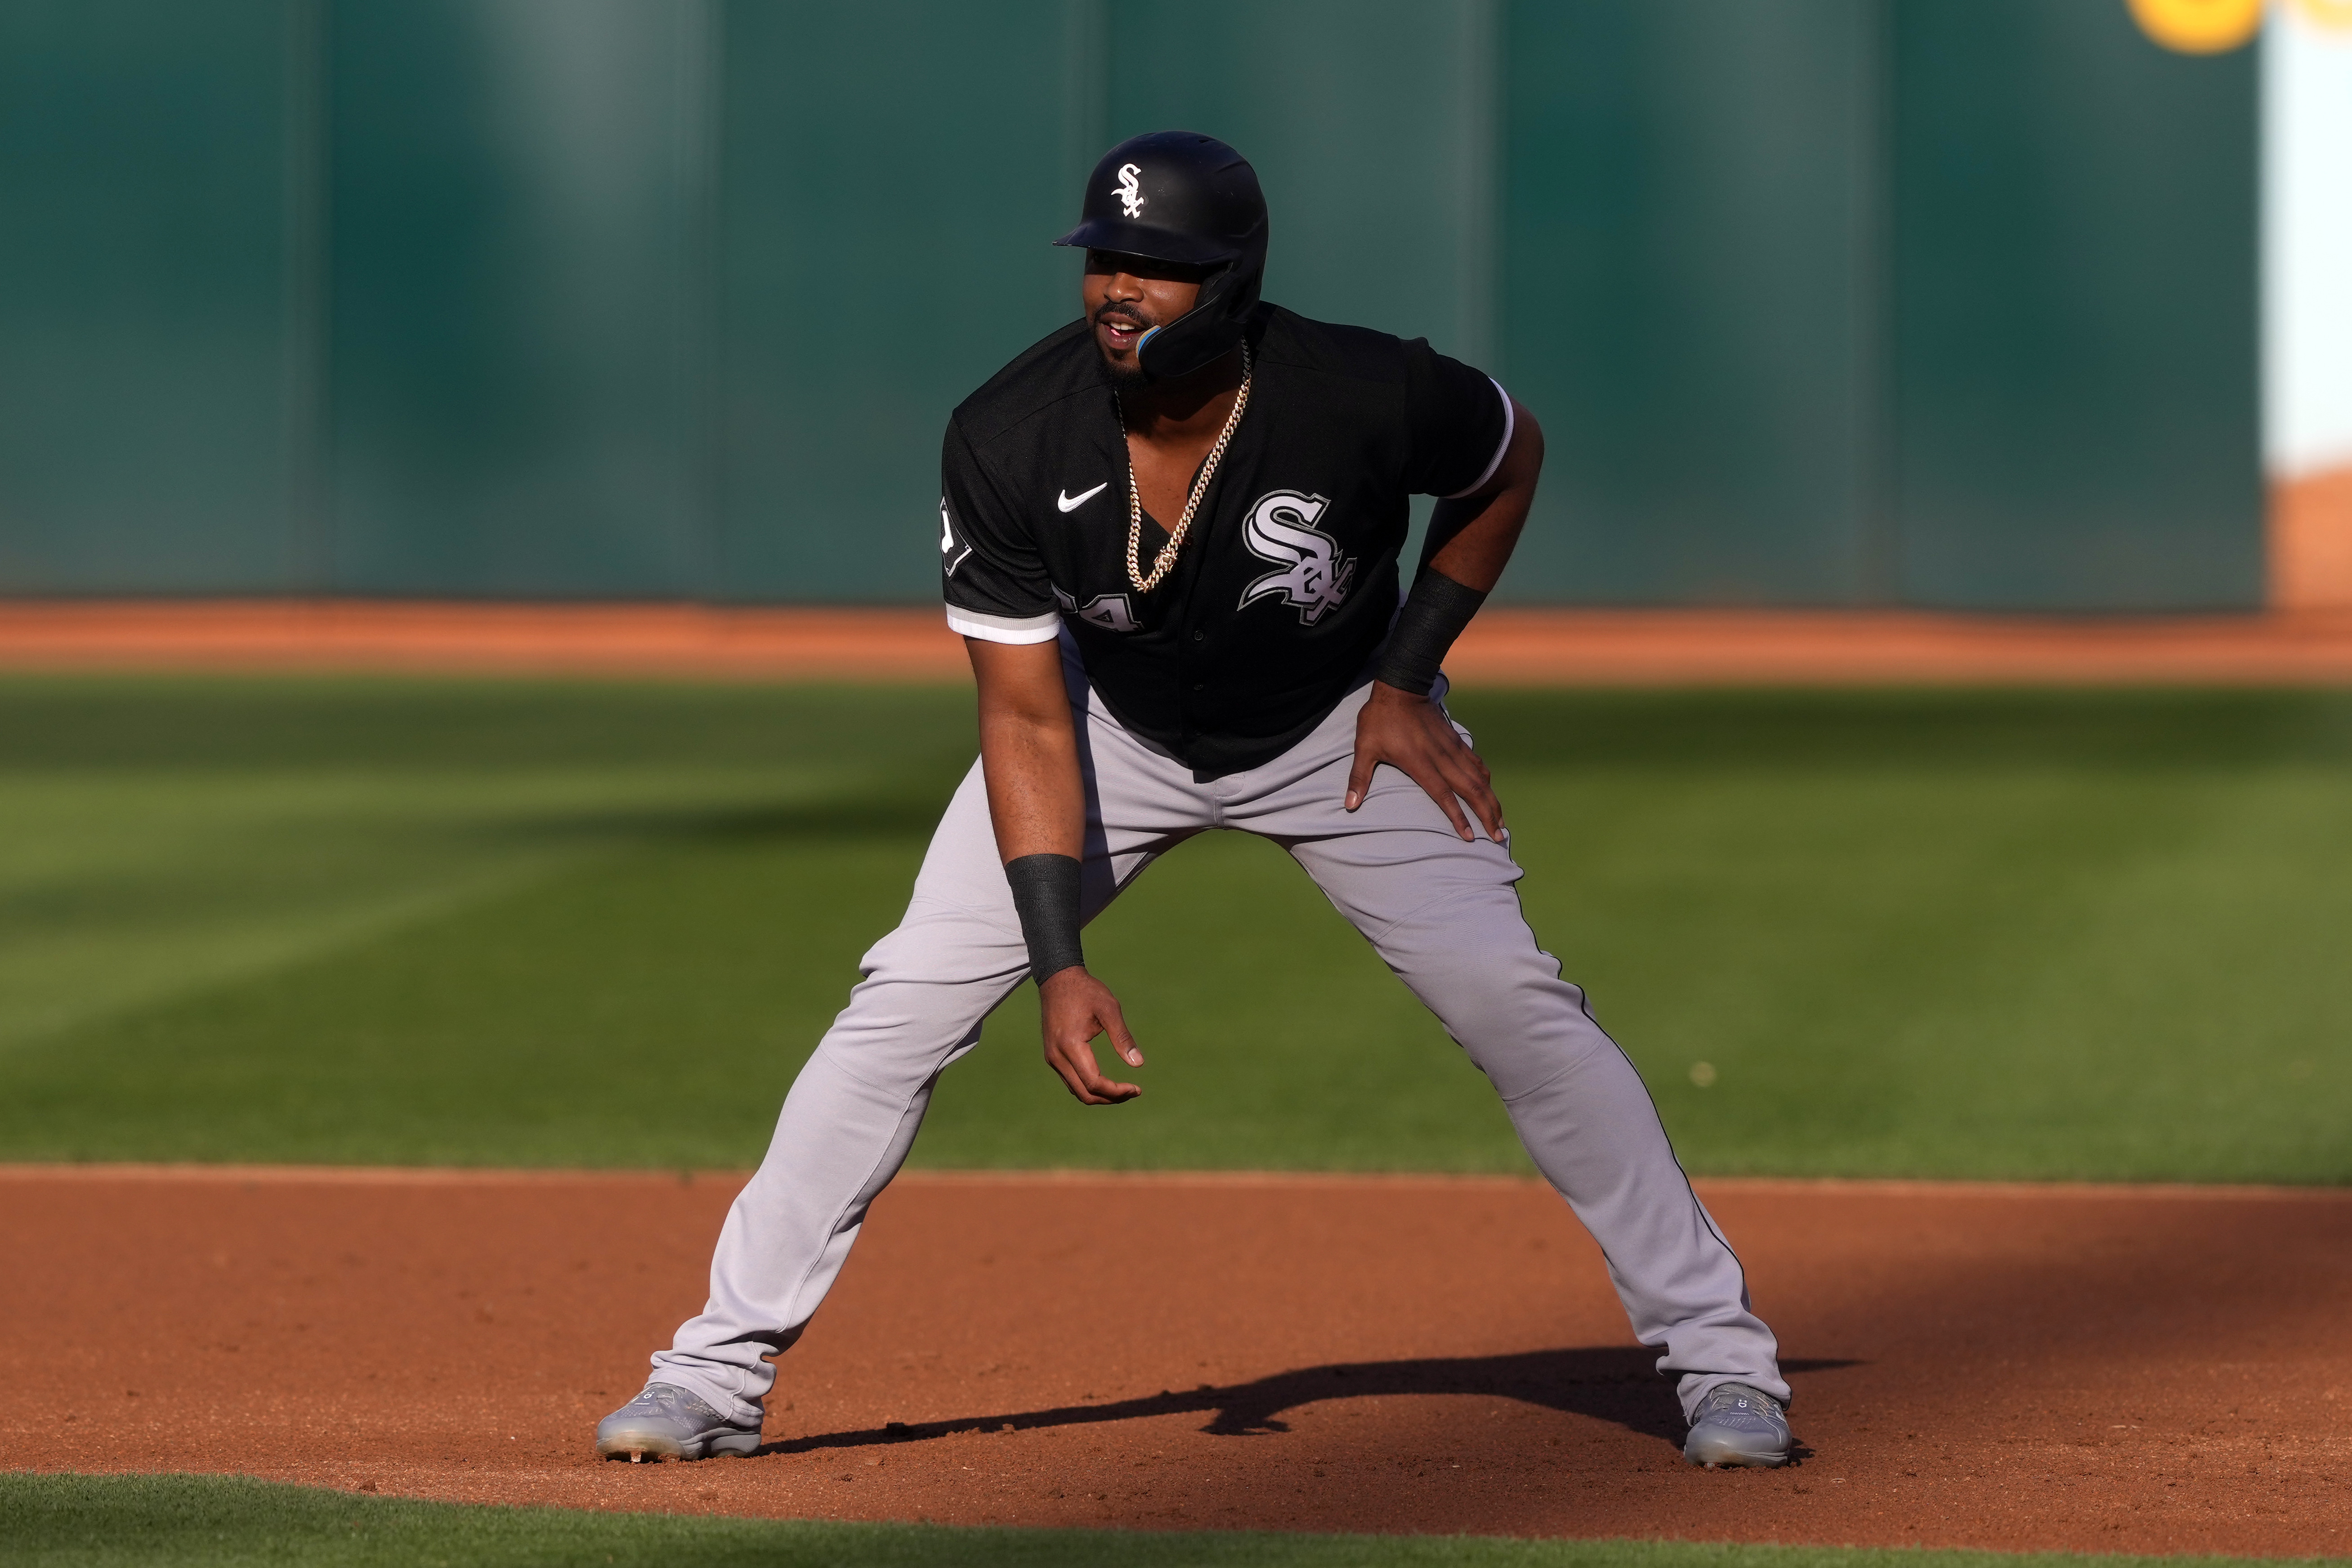 Hot stuff: Robert aims to make instant impact with Chicago White Sox